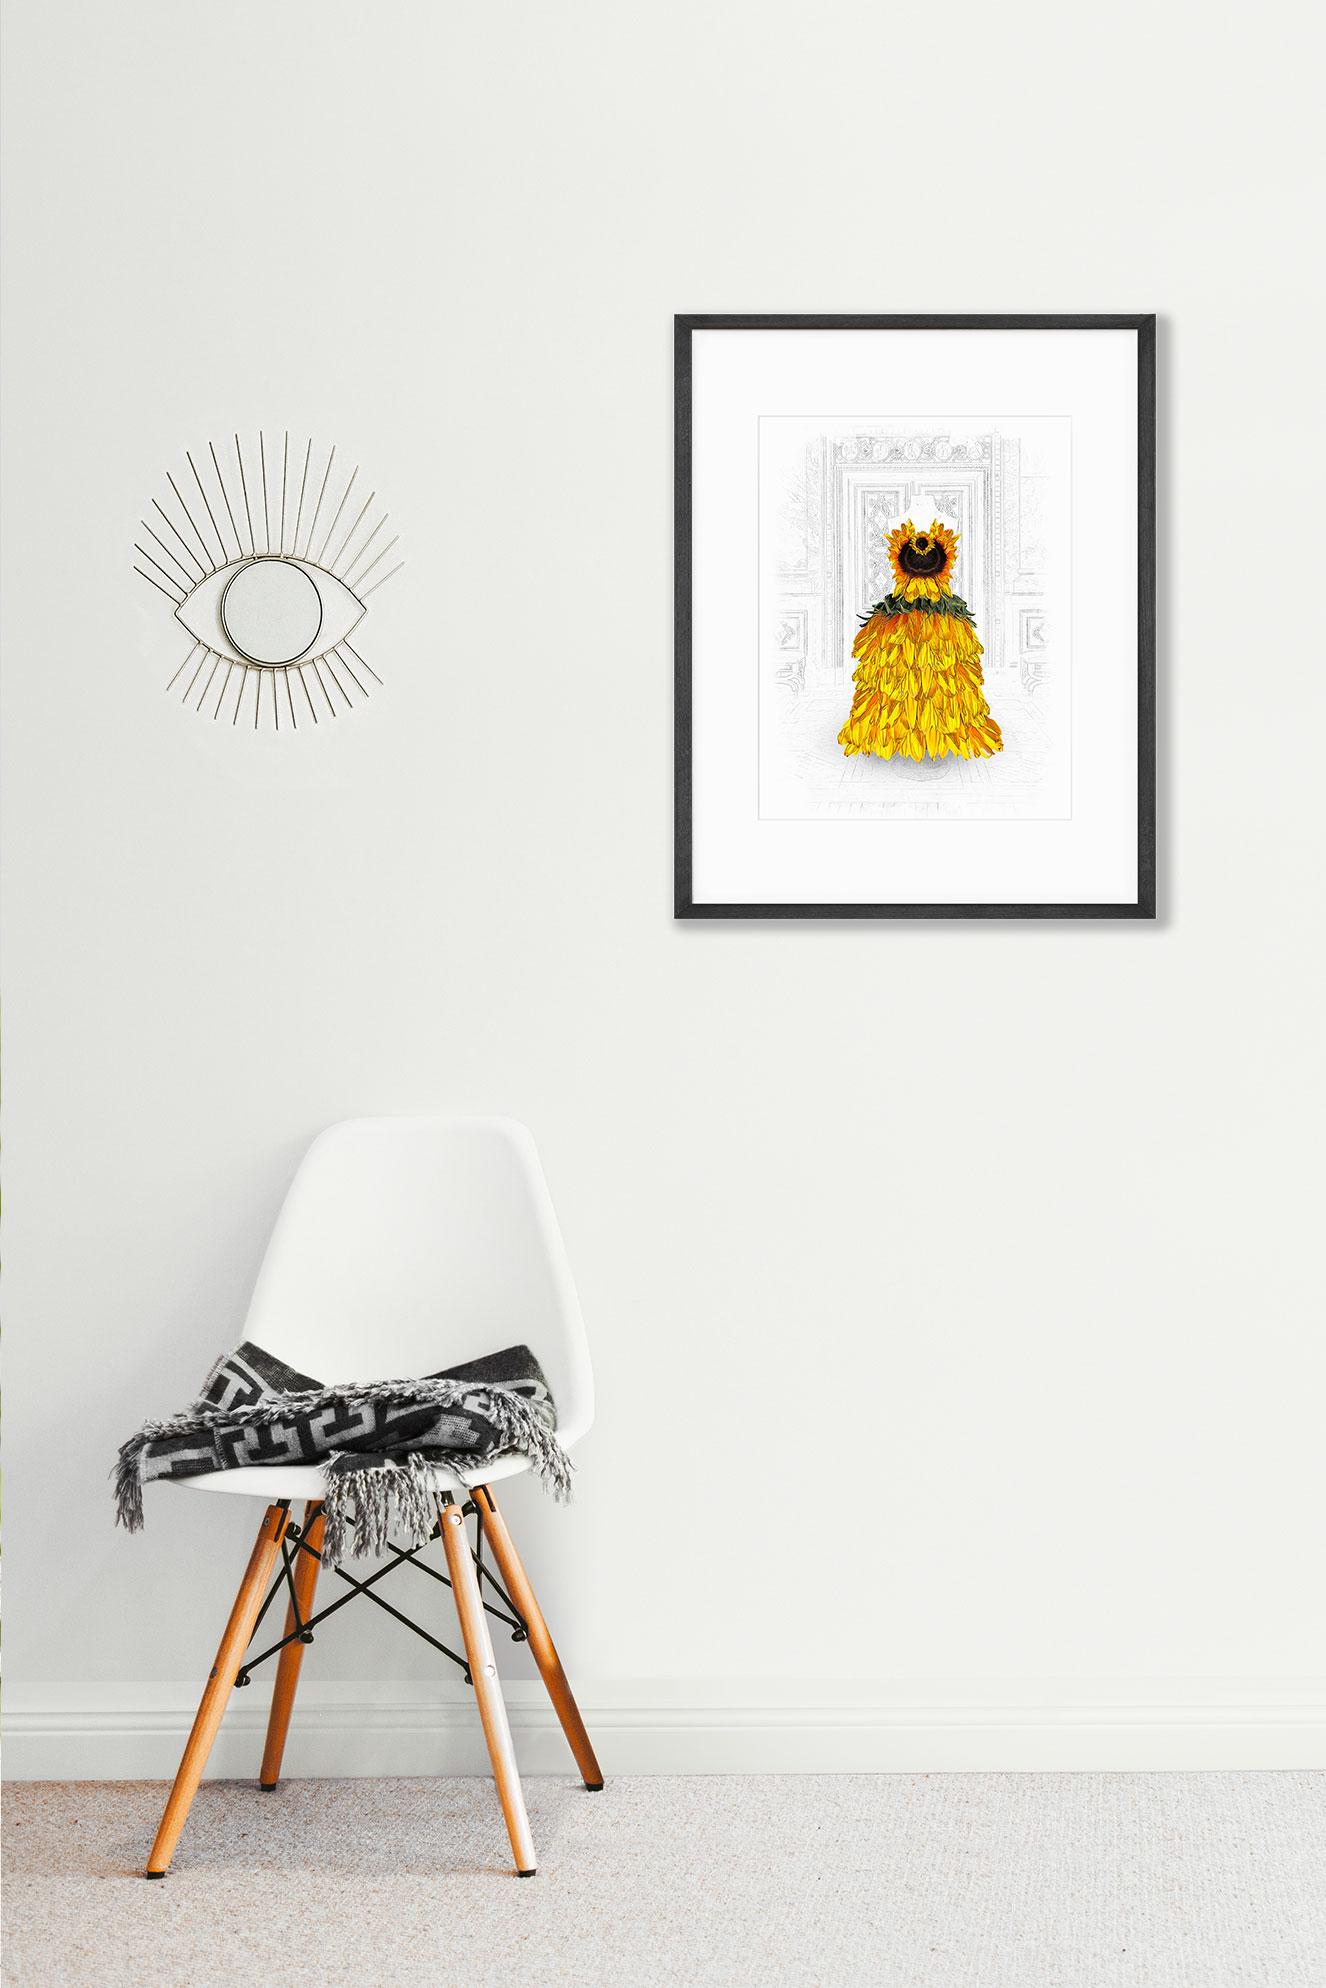 Sunshine Delight ballgown made from sunflowers, hanging on the wall